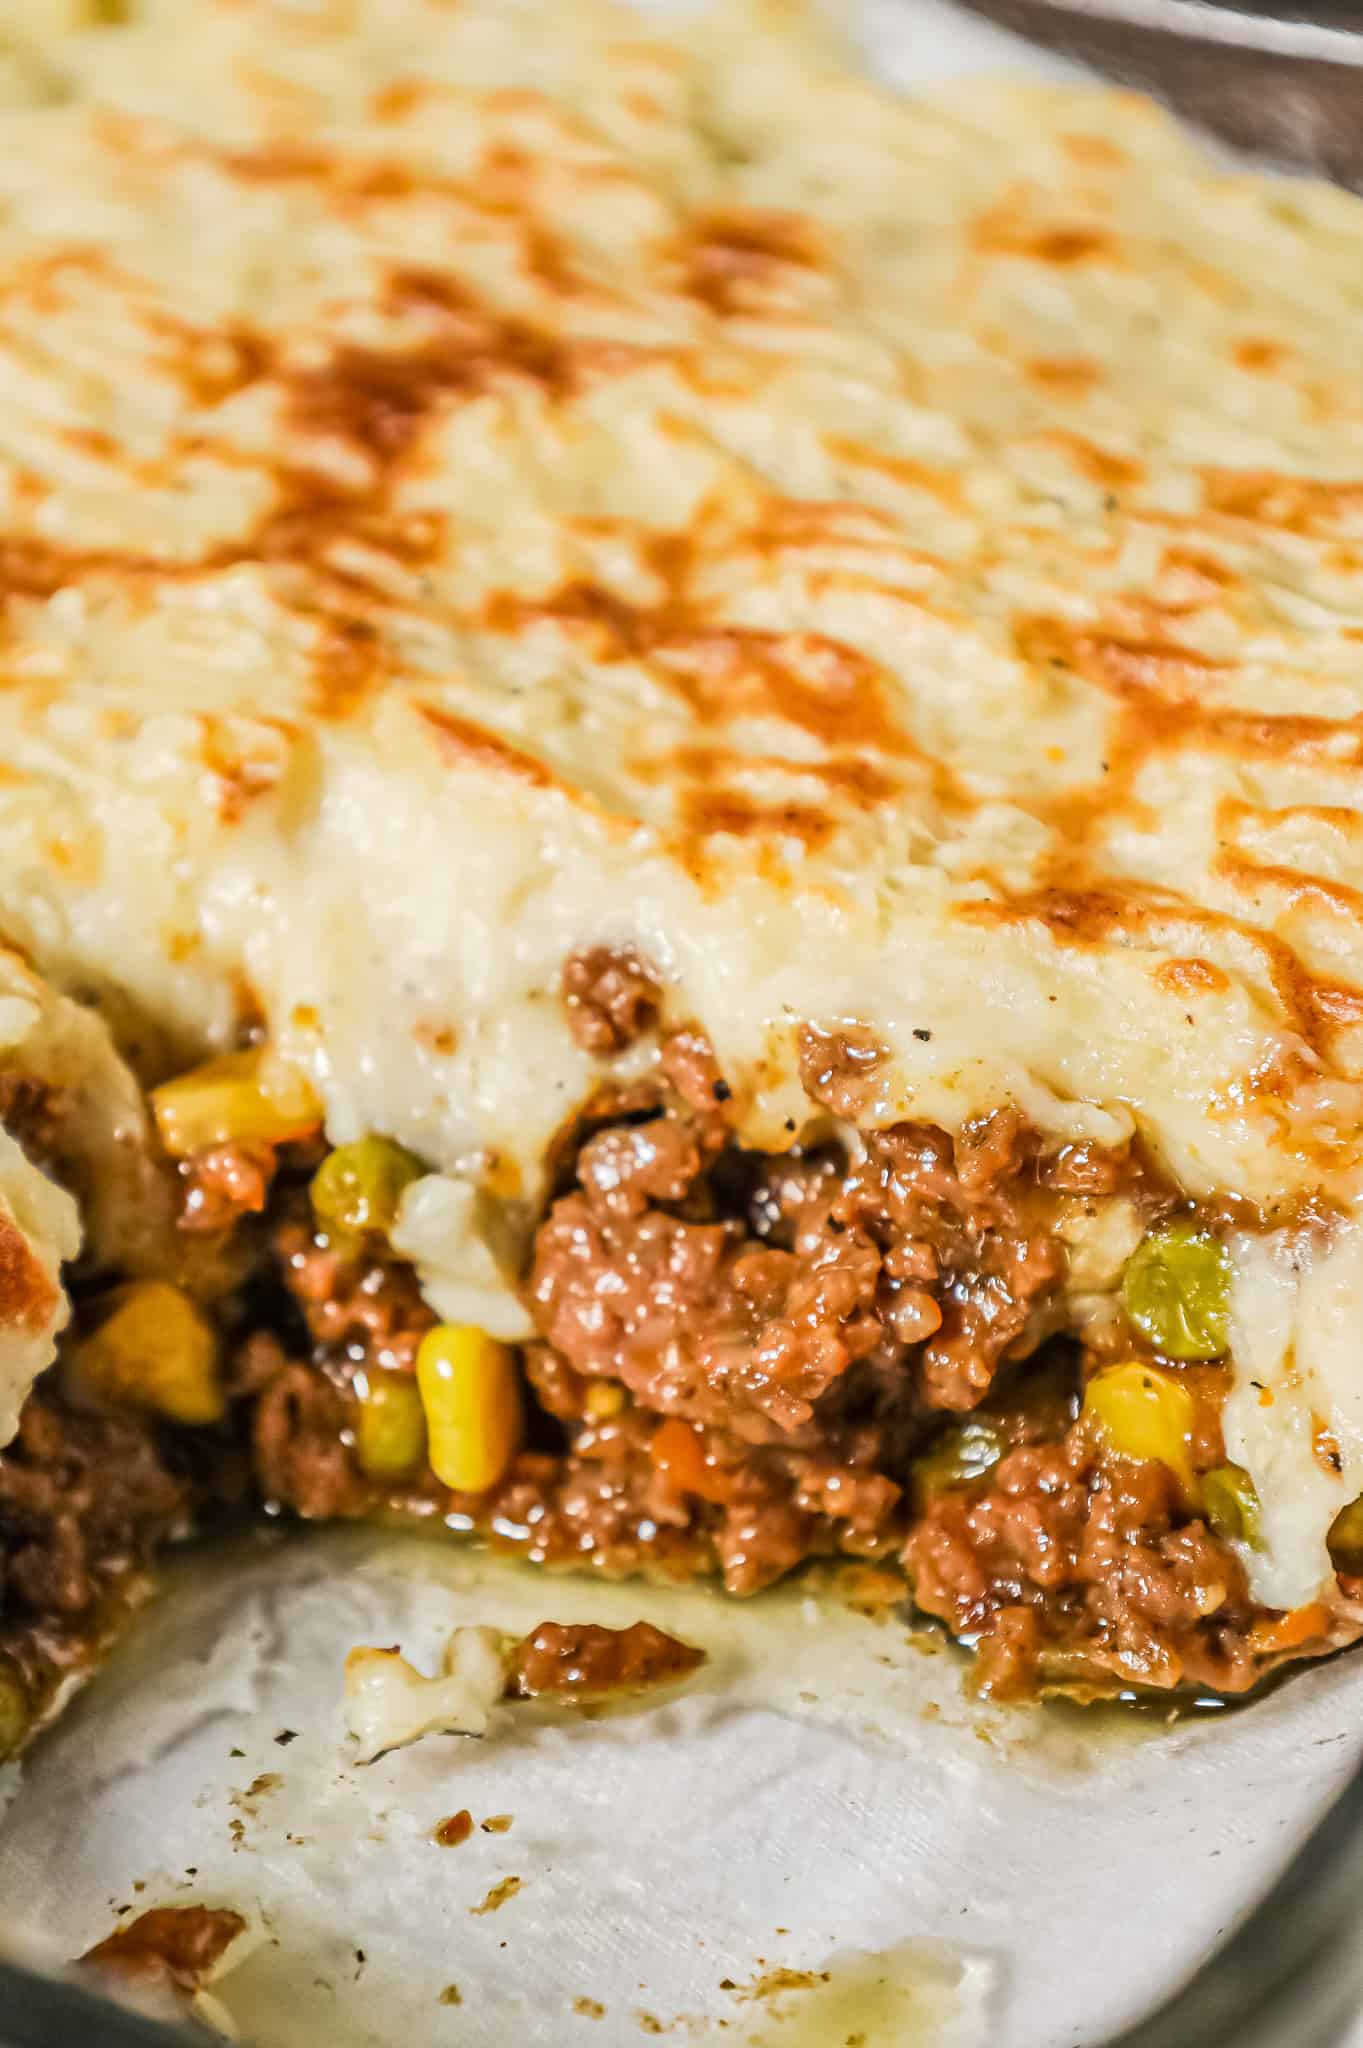 Instant Pot Shepherd's Pie is an easy pressure cooker dinner with a ground beef and vegetable mixture cooked in the pot along with the potatoes.